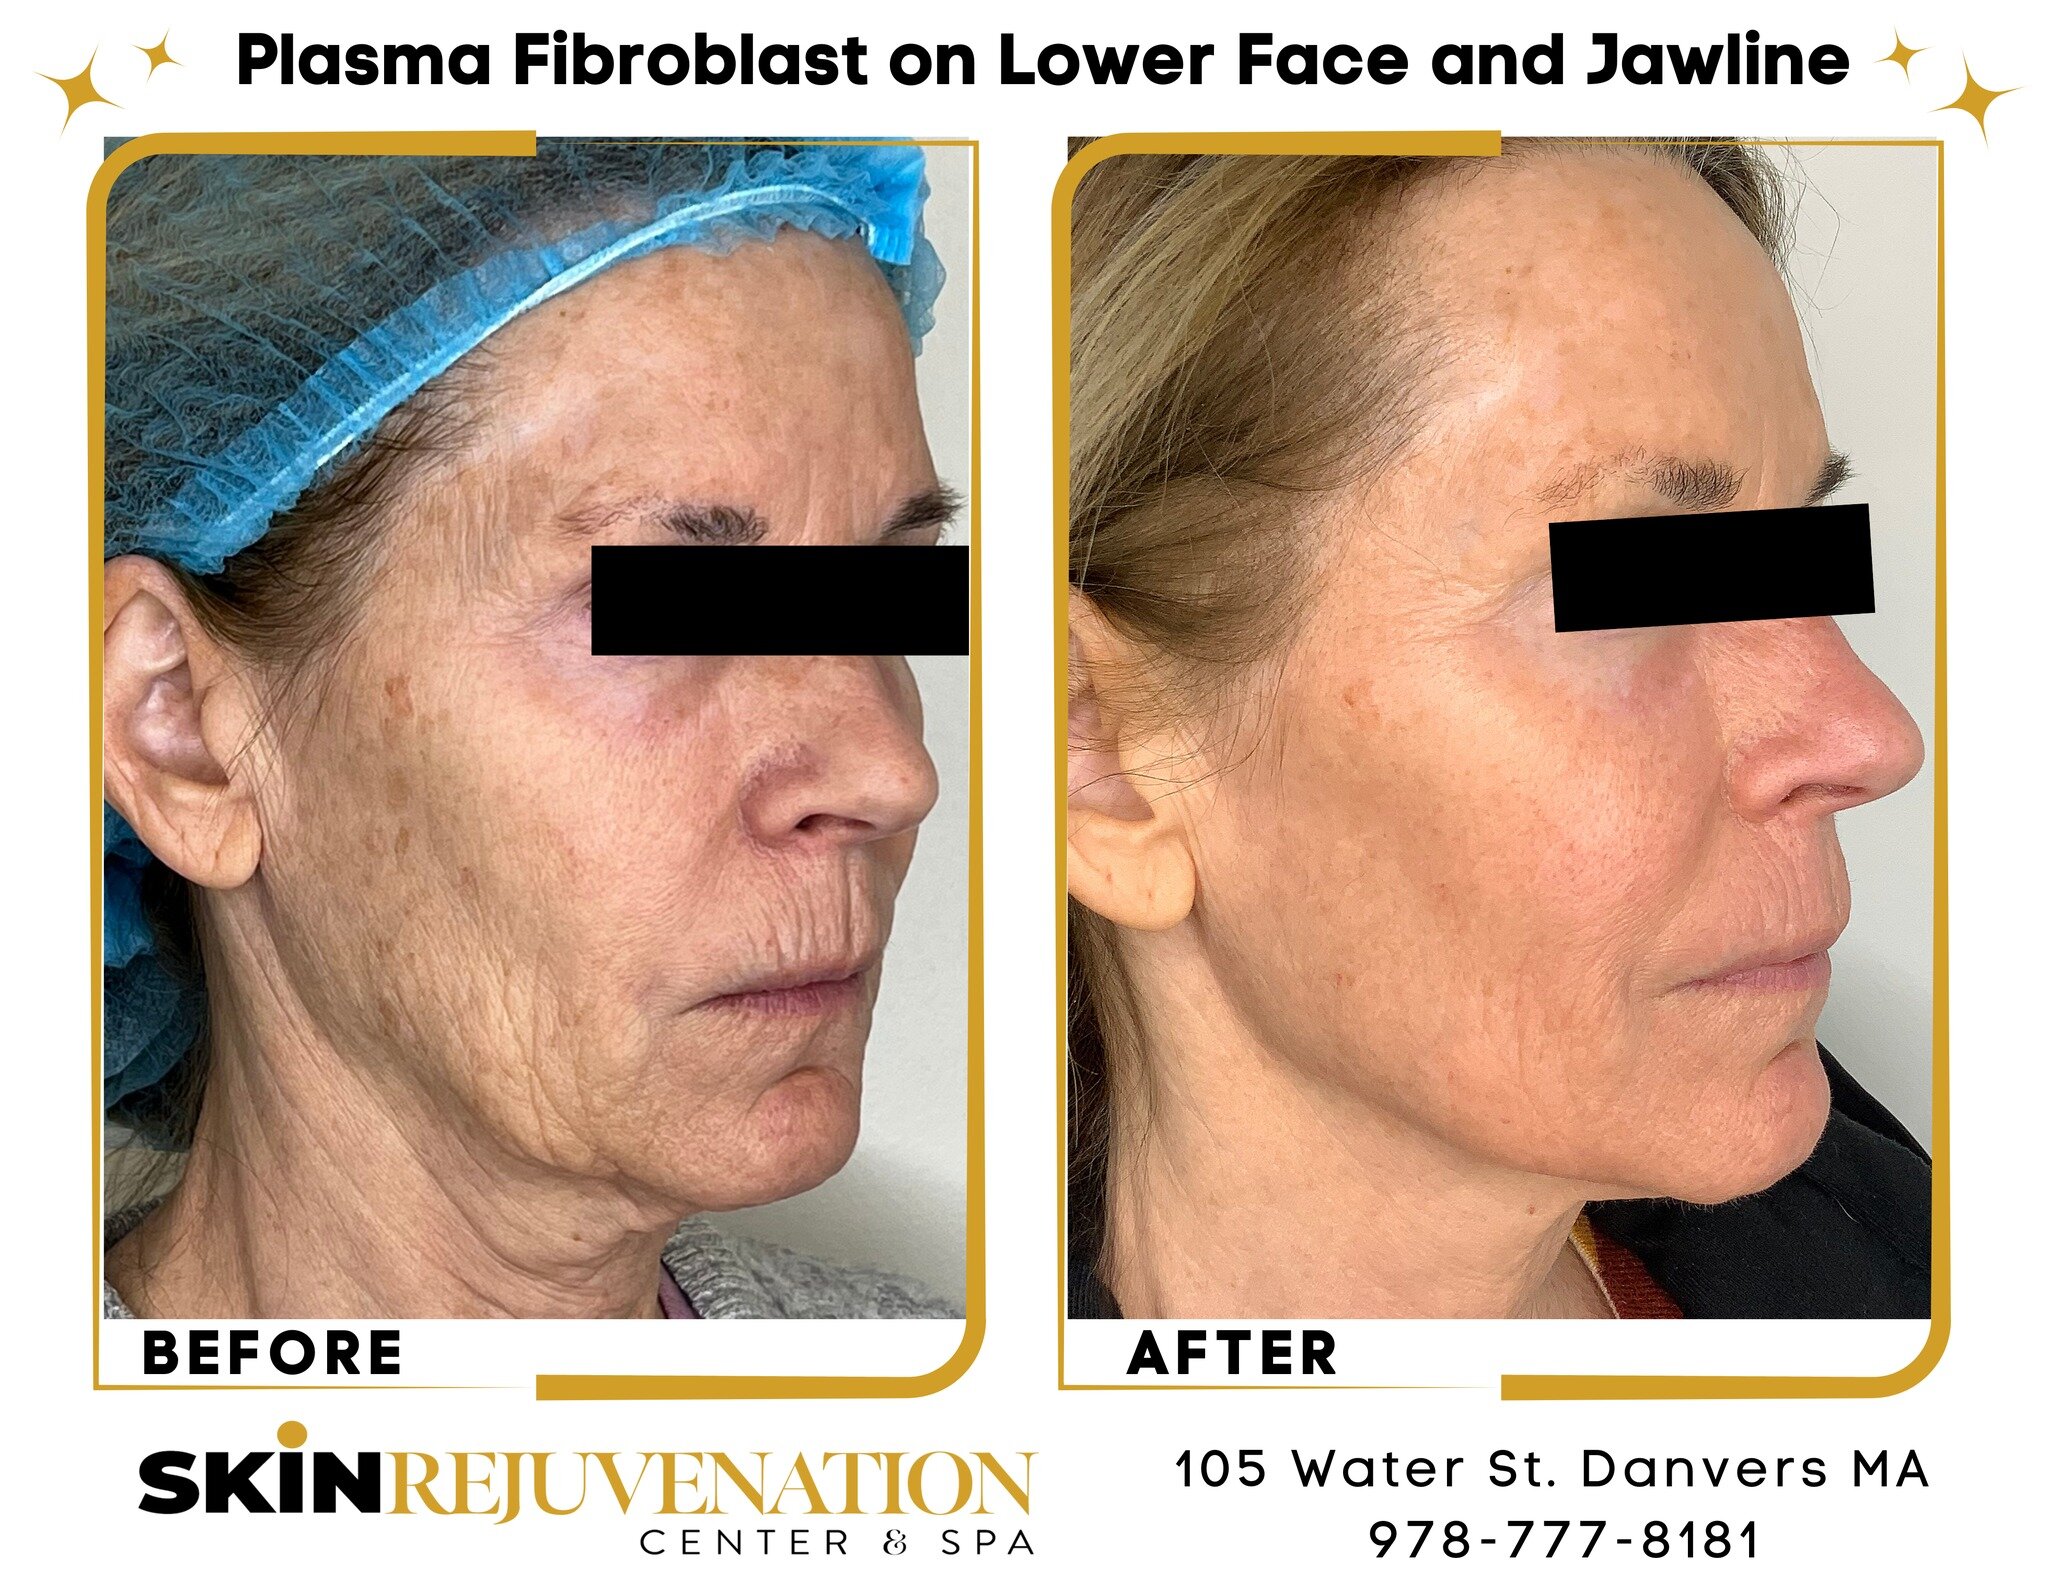 These Before and After Plasma Fibroblast Photos are just incredible! Our Master Plasmologist, Saundra, treated our client's lower face and jawline. The results are REAL and undeniable. No Editing or Photoshop!! If you want to turn back time with plas